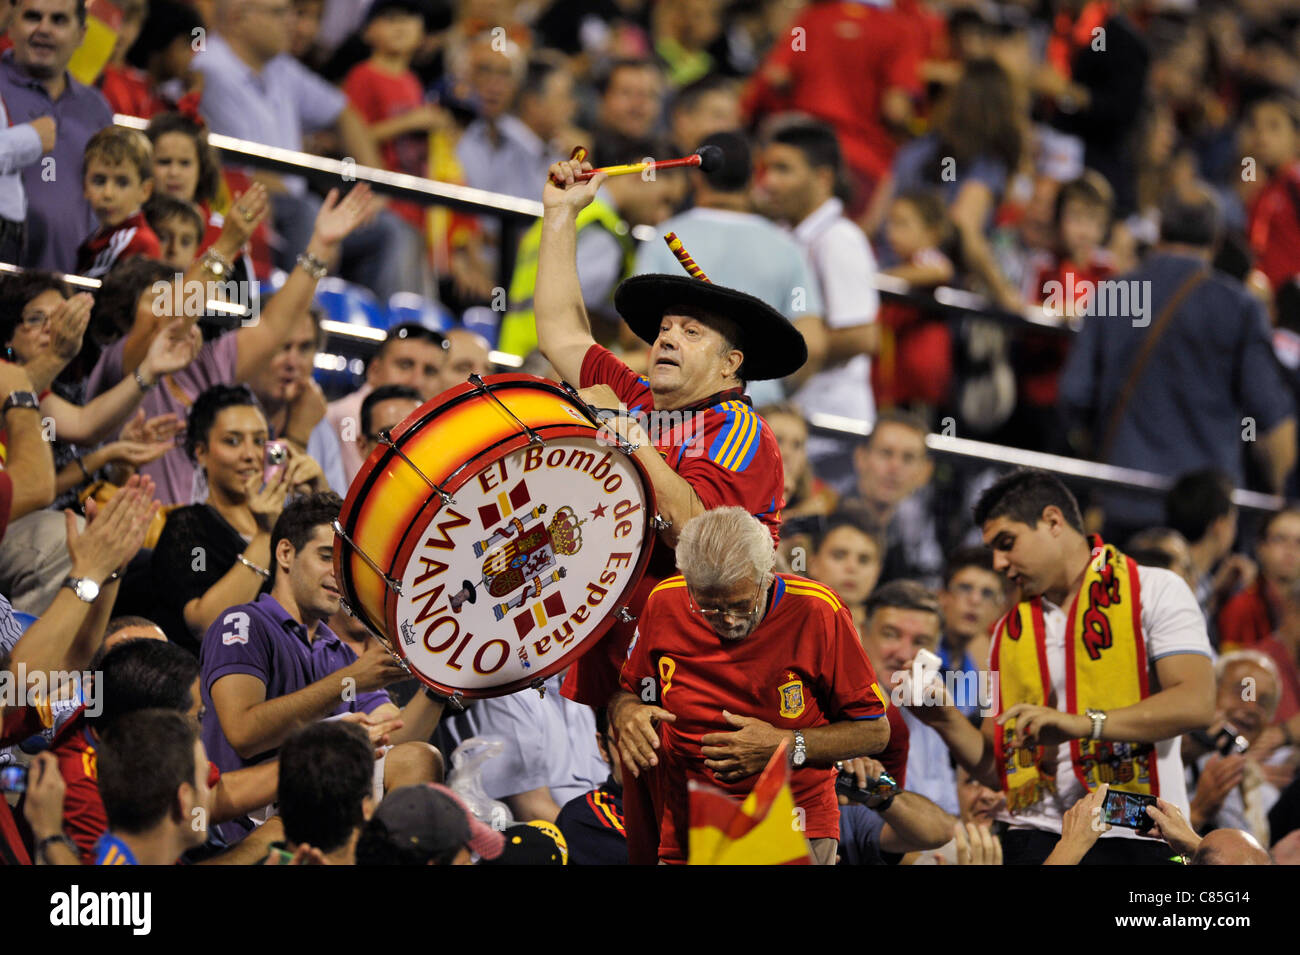 Manolo el del Bombo, mascot of the spanish national team during the Euro 2012 qualification match between Spain and Scotland (3:1) in Rico Perez Stadium in Alicante, Spain Stock Photo